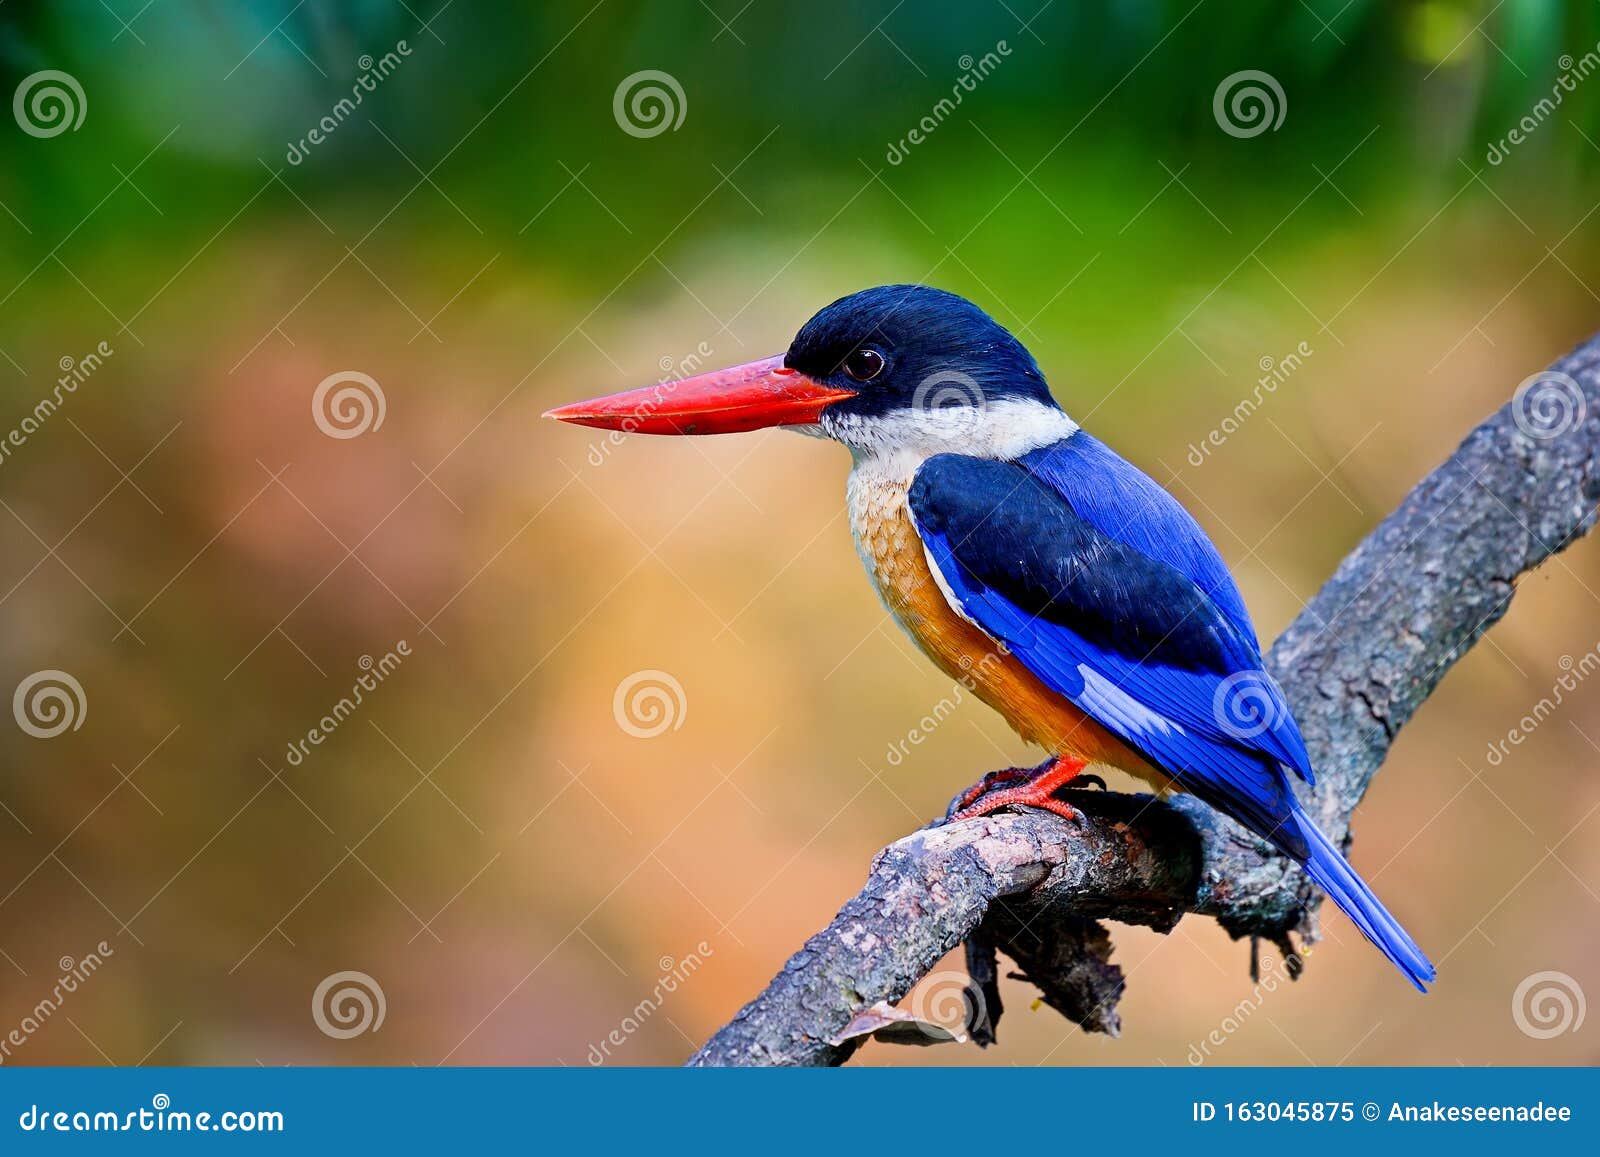 Black-headed Kingfisher on Timber Stock Image - Image of forest, brown ...